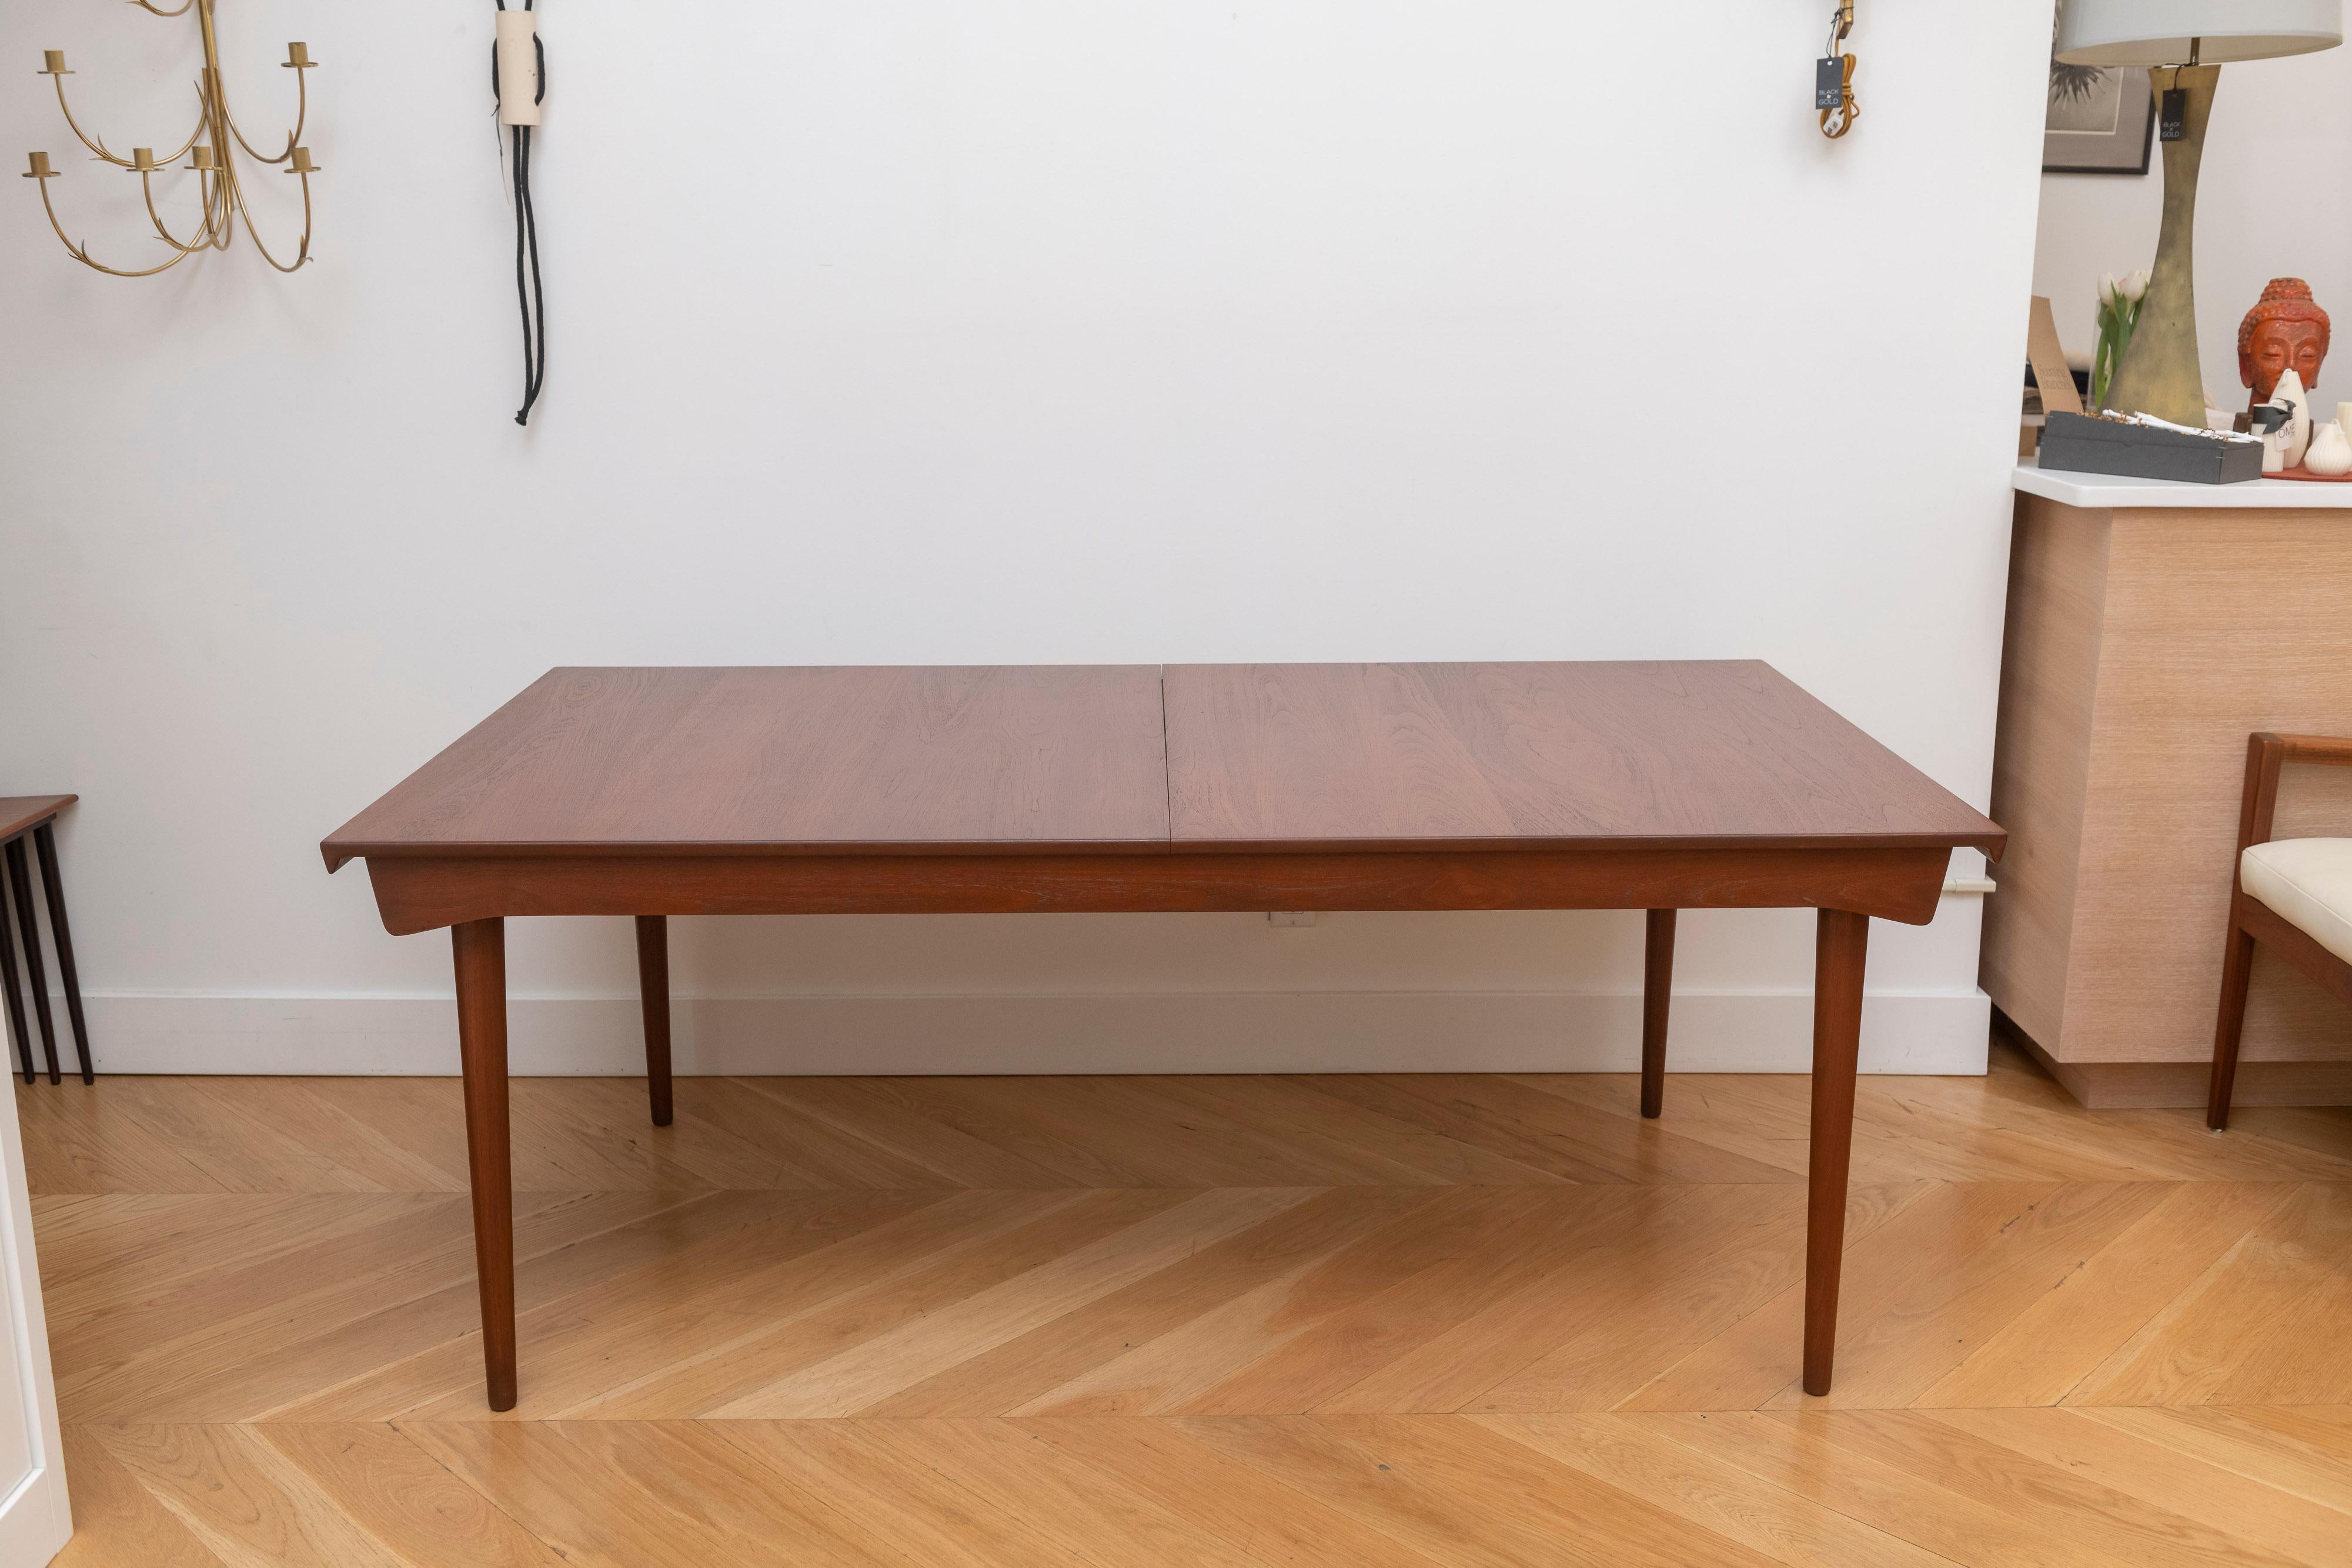 An exceptional all original example from Finn Juhl for France and Sons. This table is in solid teak, no veneers, and is extremely well built. The dining table includes two leaves that conveniently store underneath when not in use, and when inserted